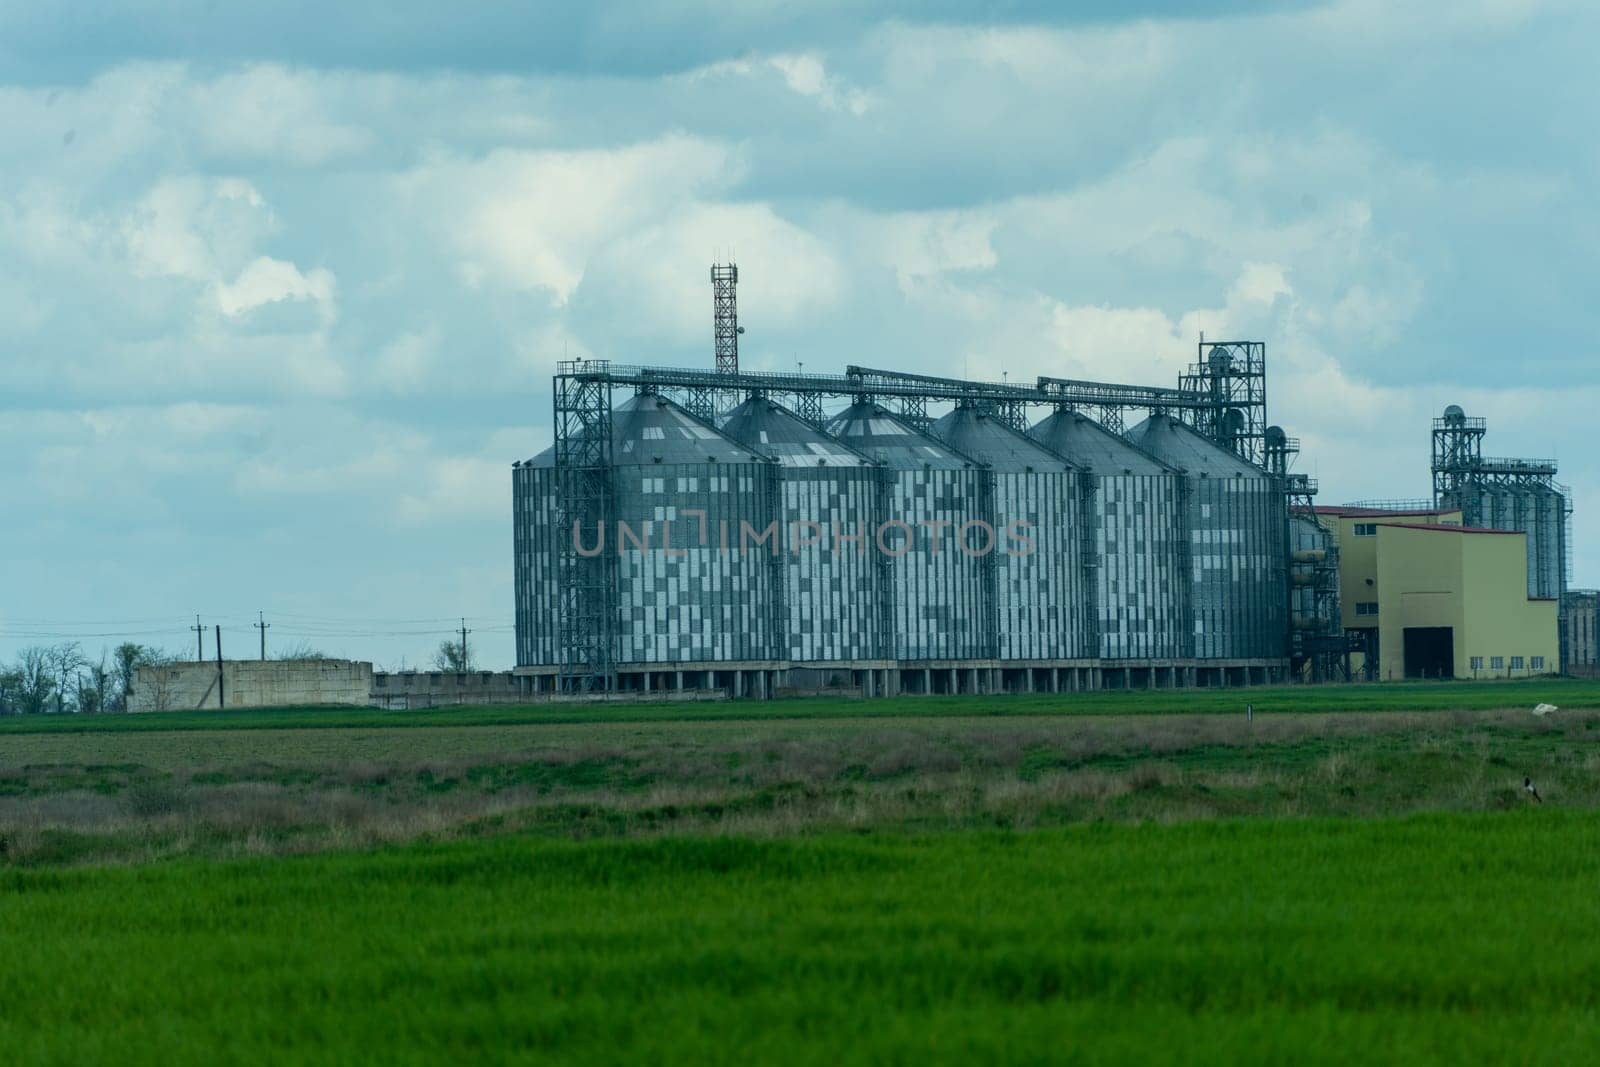 Granary elevator, silver silos on agro manufacturing plant for processing drying cleaning and storage of agricultural products, flour, cereals and grain. A field of green wheat. by Matiunina